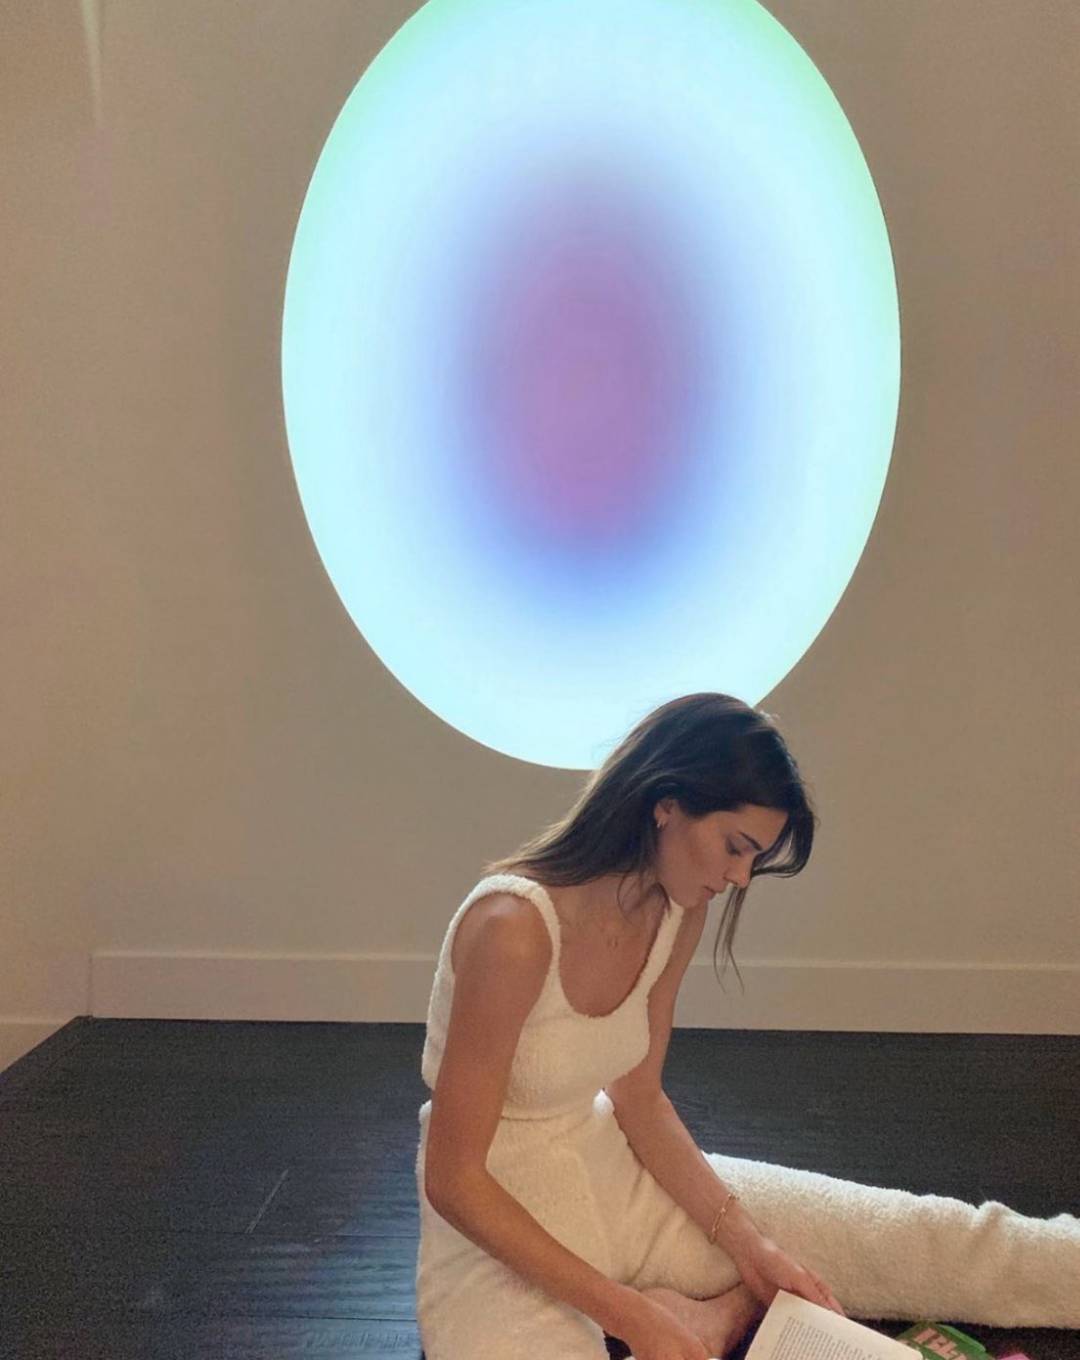 Taking photos of one's aura is the current trend Where does this phenomenon come from?